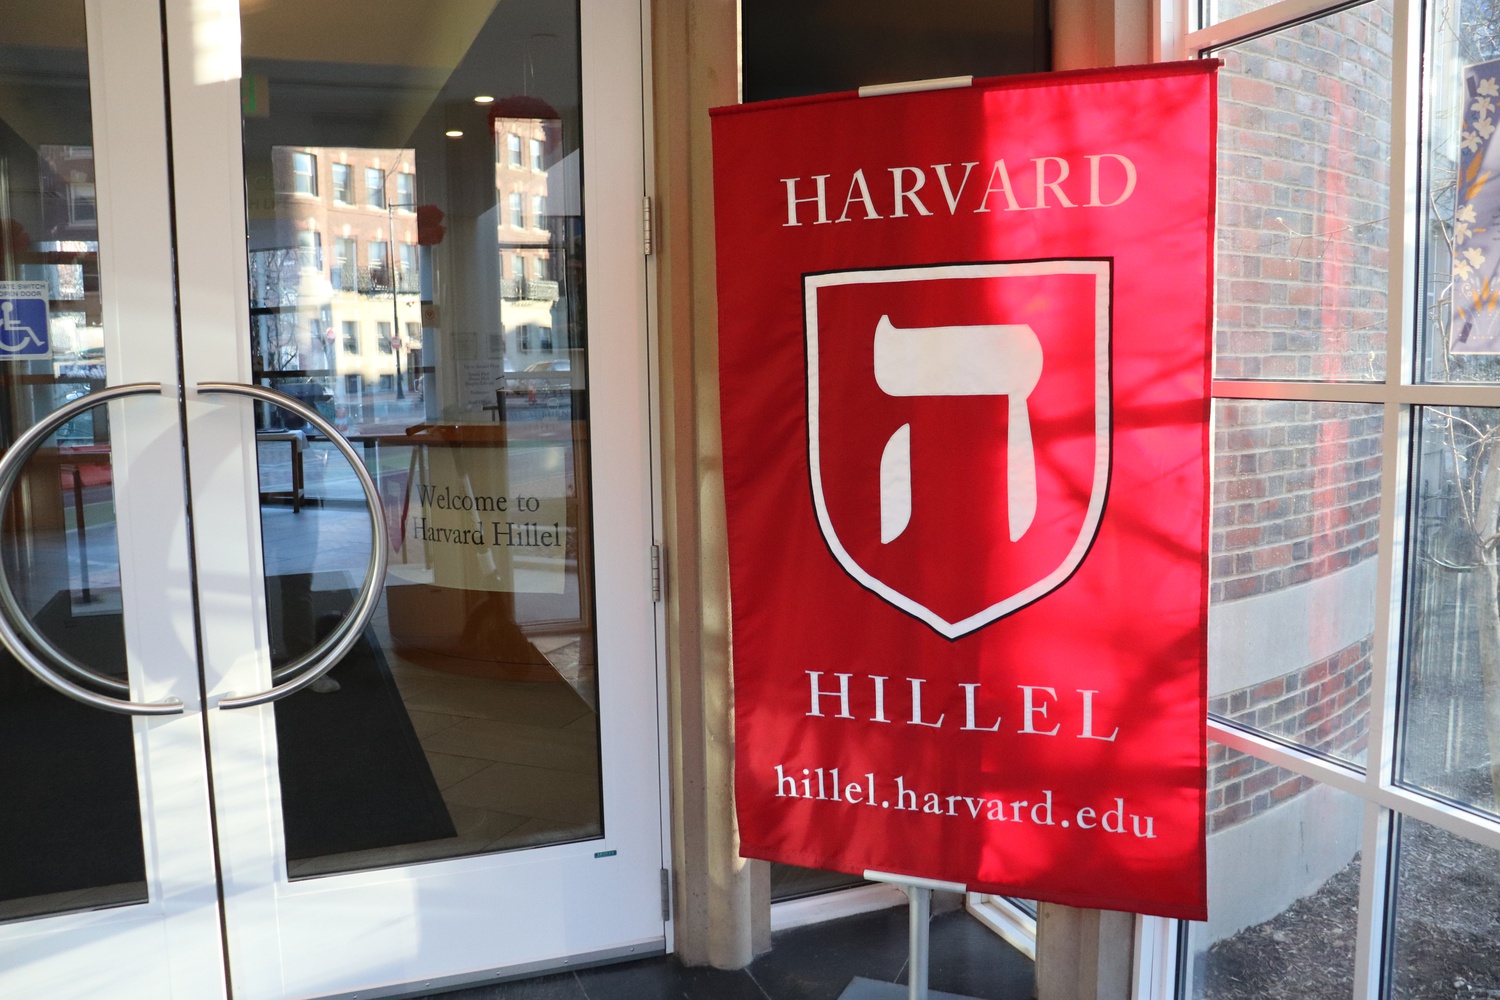 University President Claudine Gay announced at a Harvard Hillel Shabbat dinner on Friday that top school officials will work with a new advisory group to oppose antisemitism on campus.